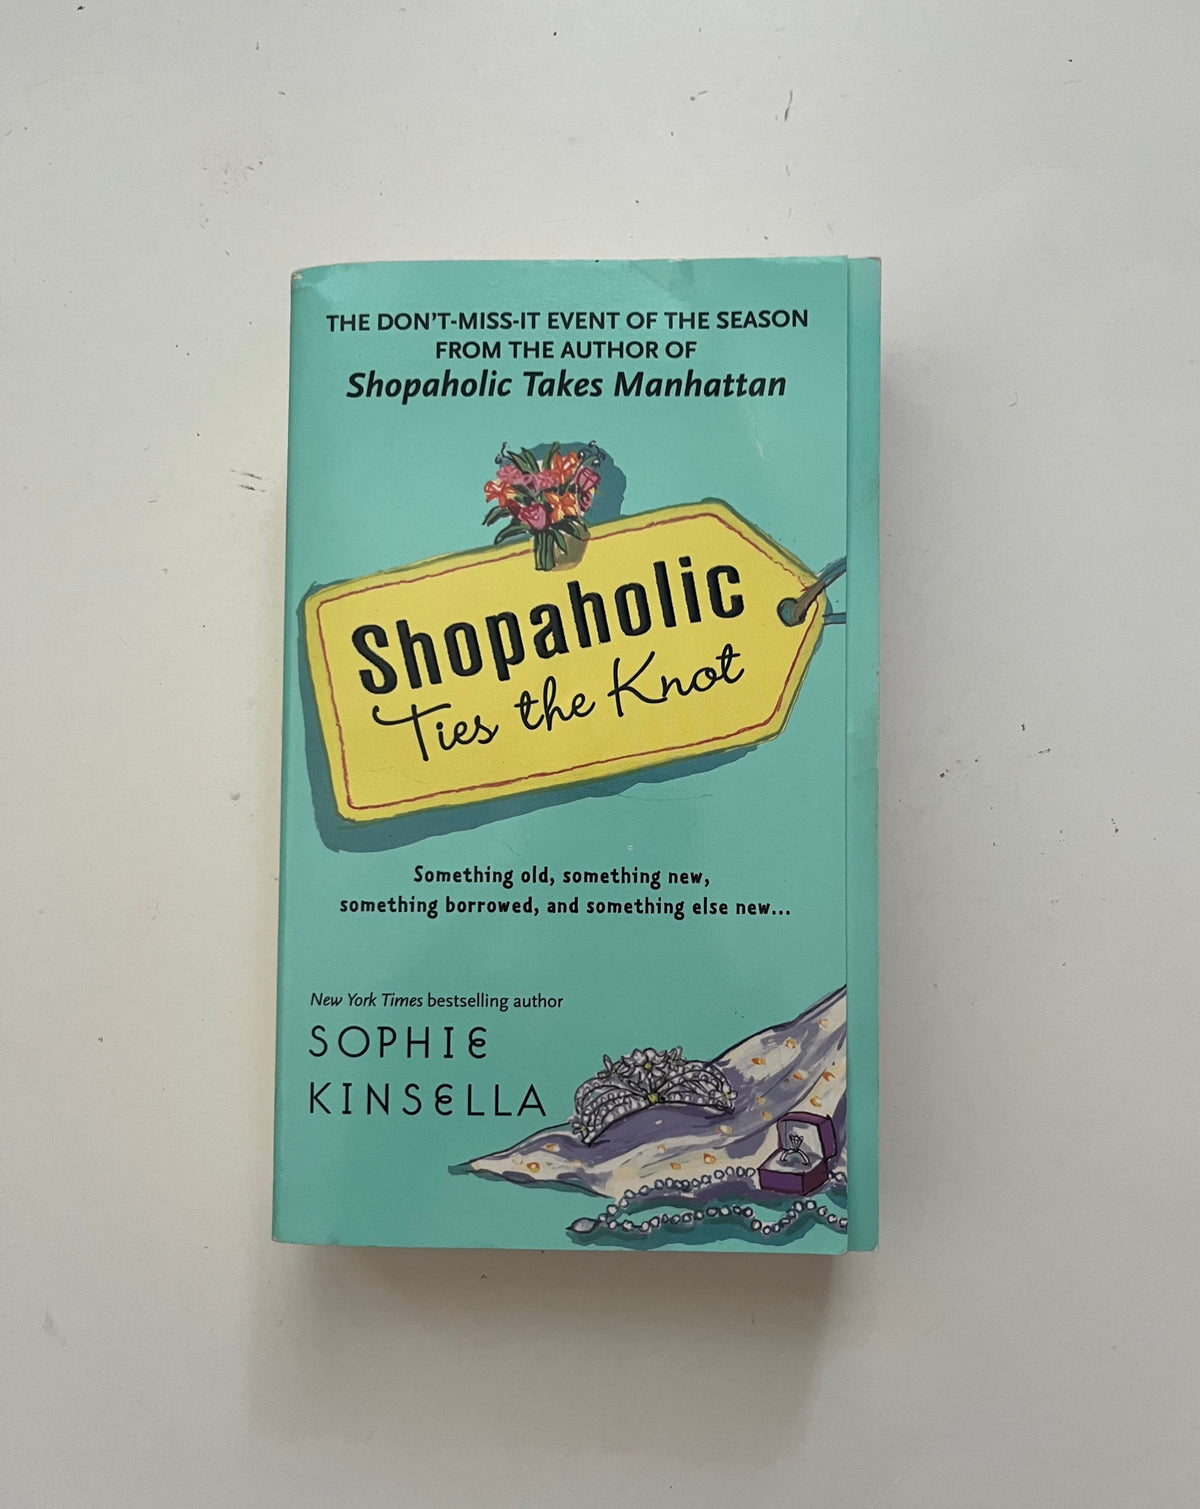 Shopaholic Ties the Knot by Sophie Kinsella